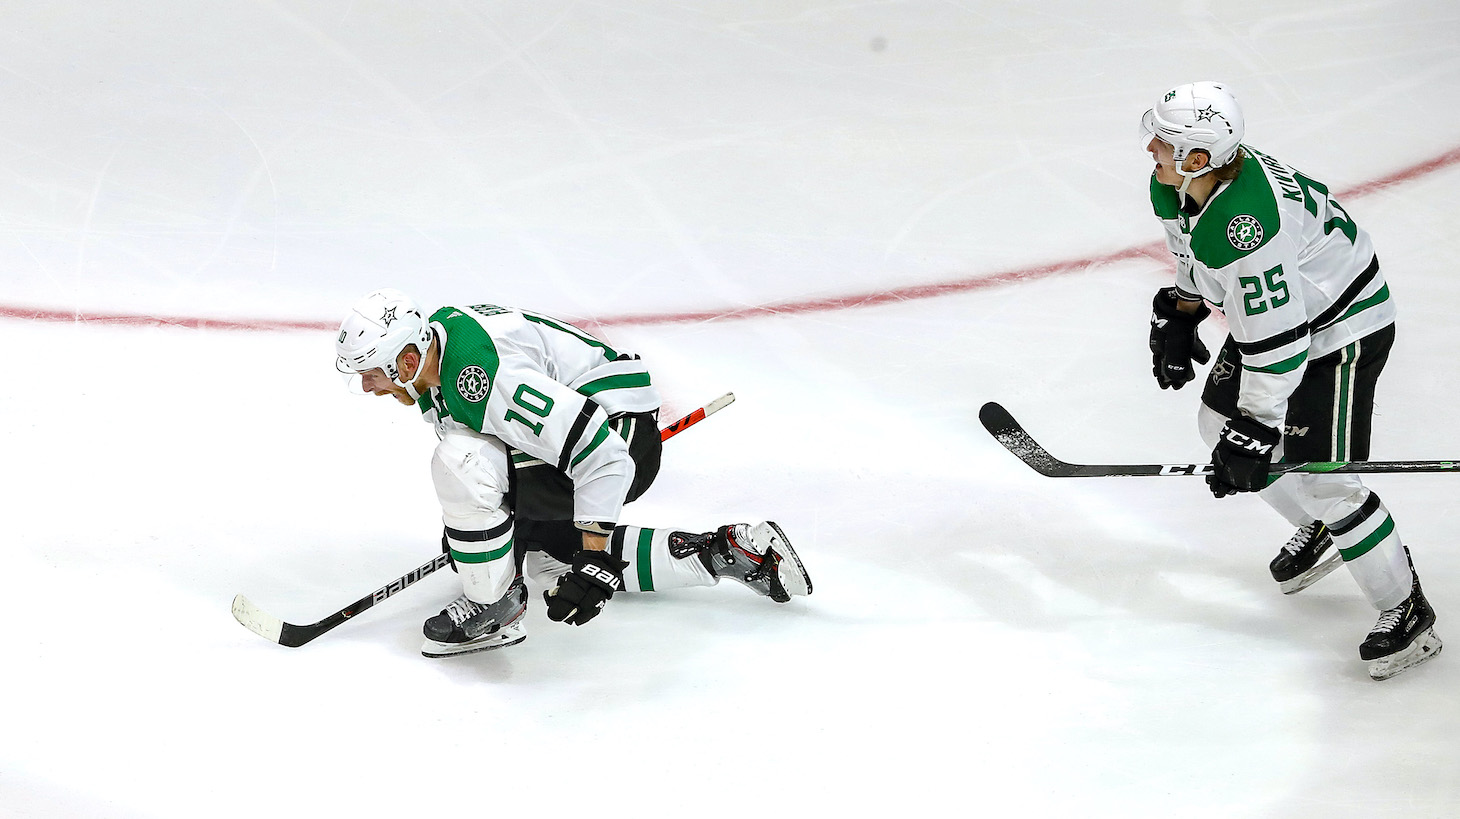 EDMONTON, ALBERTA - SEPTEMBER 26: Corey Perry #10 of the Dallas Stars celebrates after scoring the game-winning goal against the Tampa Bay Lightning during the second overtime period to give the Stars the 3-2 victory in Game Five of the 2020 NHL Stanley Cup Final at Rogers Place on September 26, 2020 in Edmonton, Alberta, Canada. (Photo by Bruce Bennett/Getty Images)